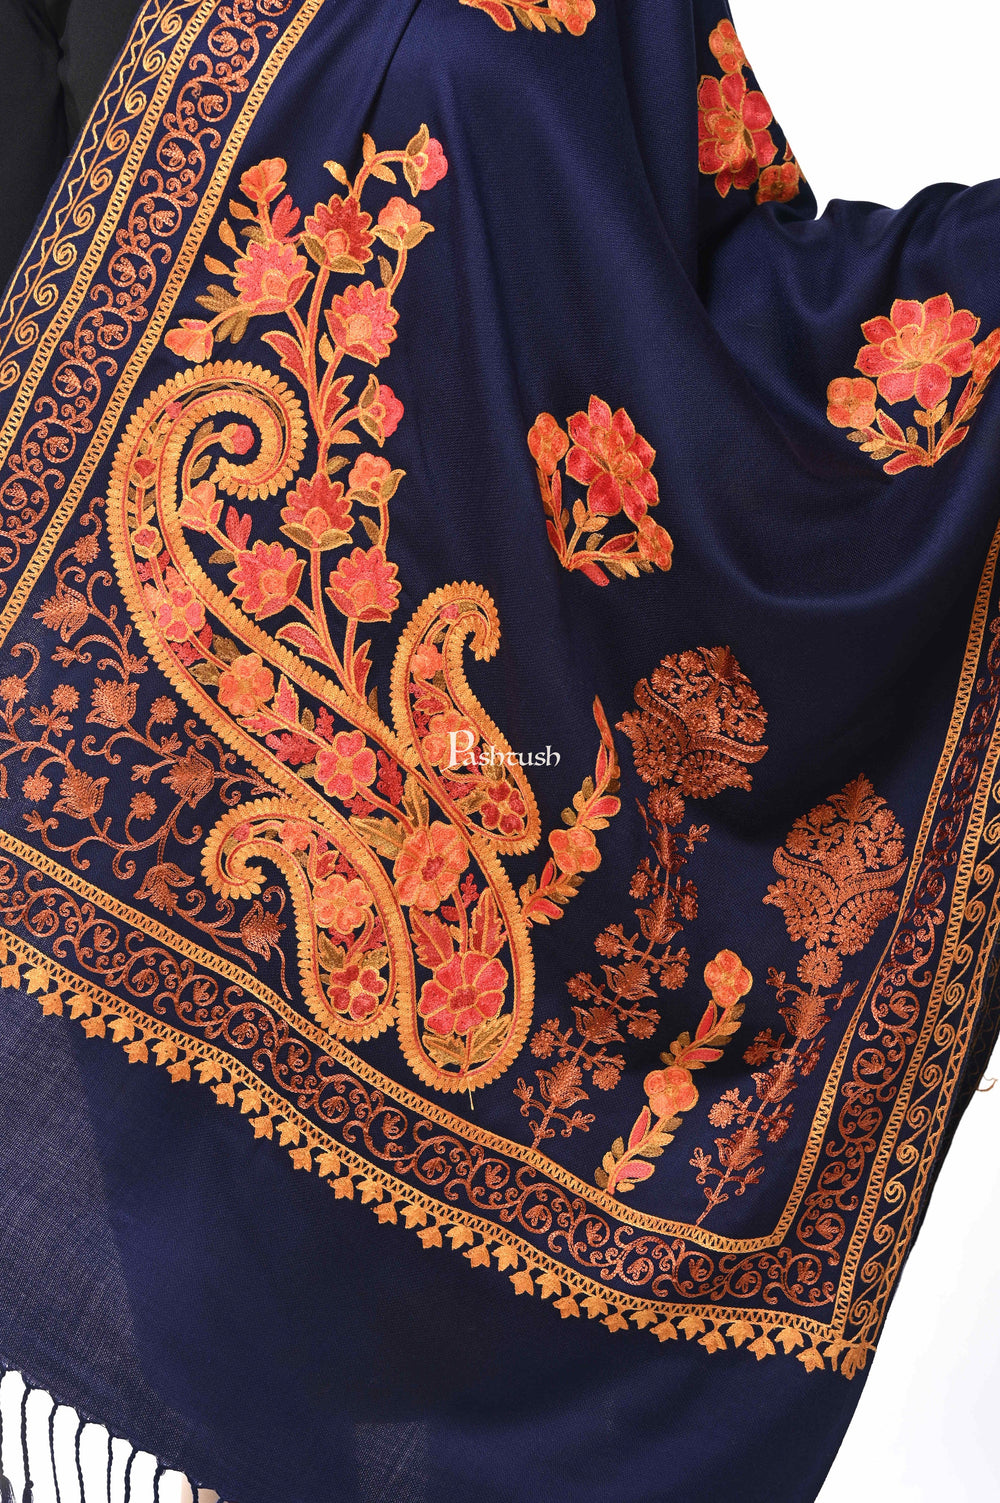 Pashwool Womens Stoles and Scarves Scarf Pashwool, Womens Kashmiri Aari Embroidery Stole, Soft Bamboo, Navy Blue